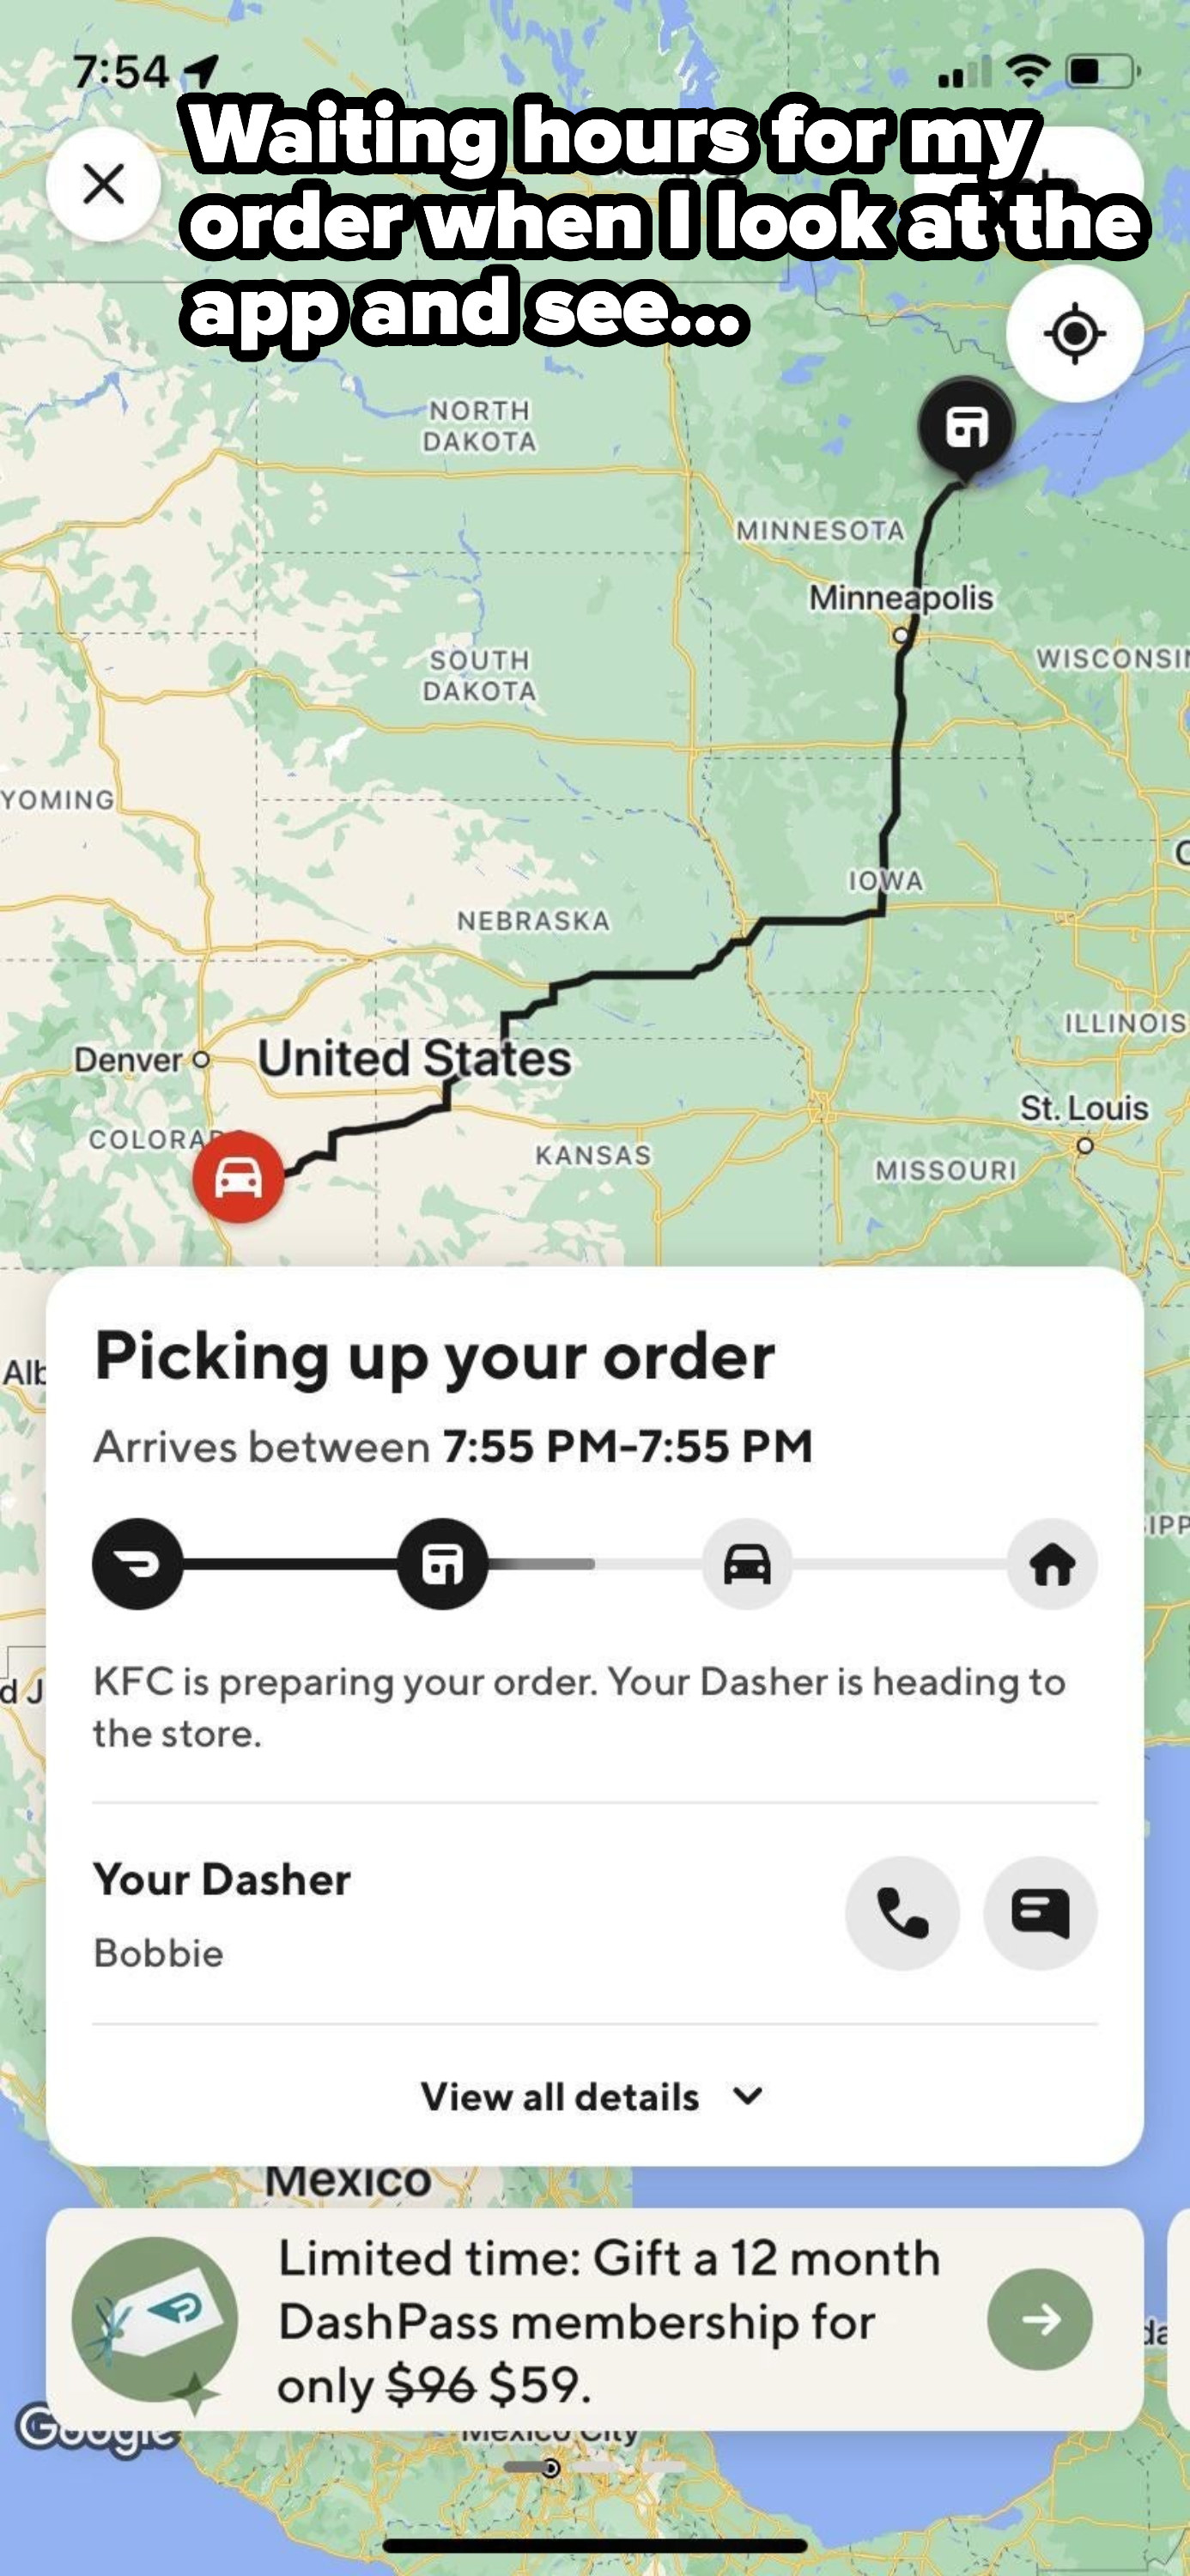 KFC app shows delivery going from Colorado to Minnesota